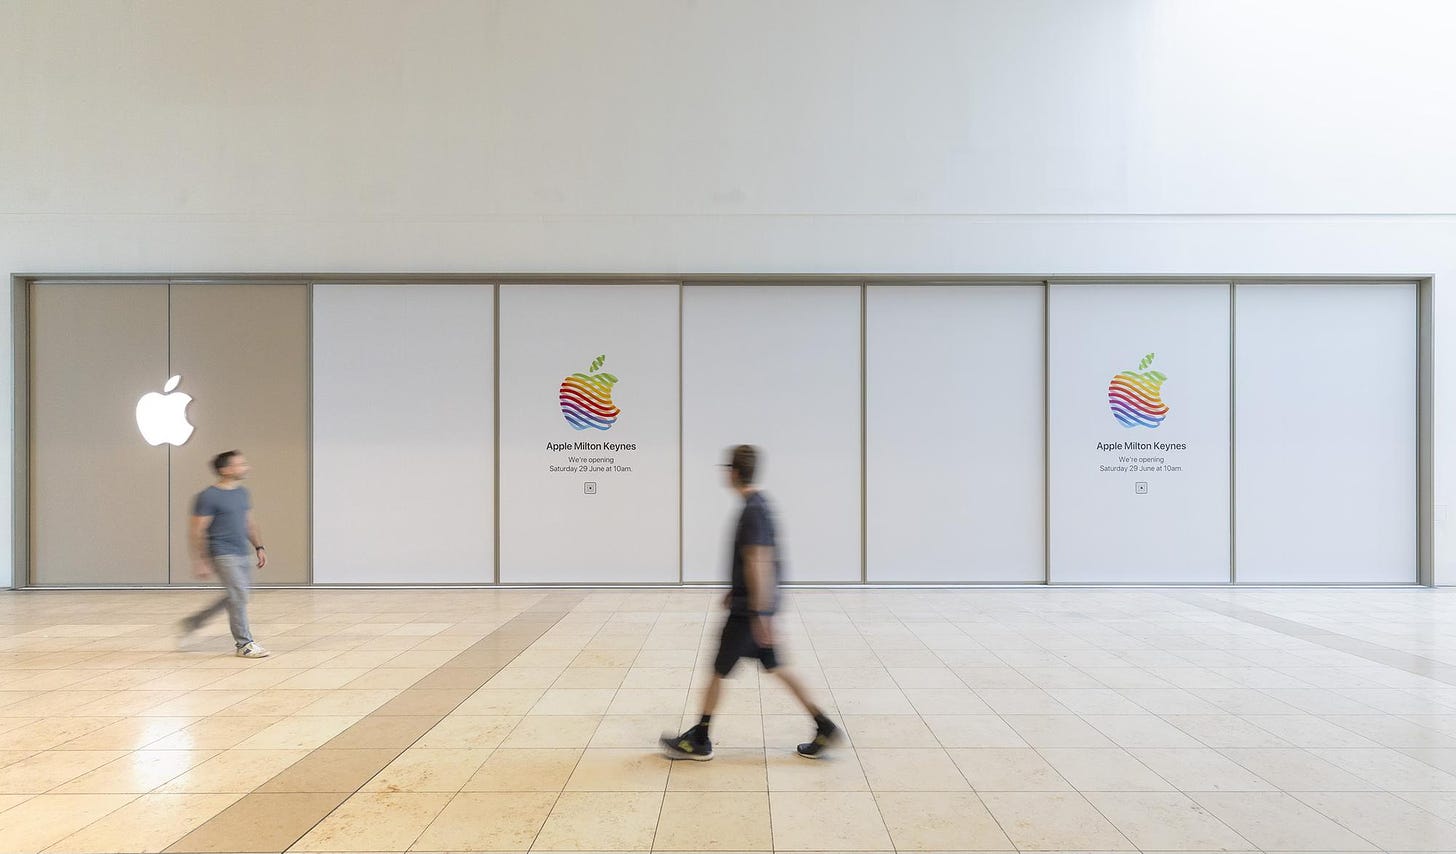 The exterior of the new Apple Milton Keynes. The storefront is covered with vinyl and two heritage logos. The store design style appears to be Vintage E.